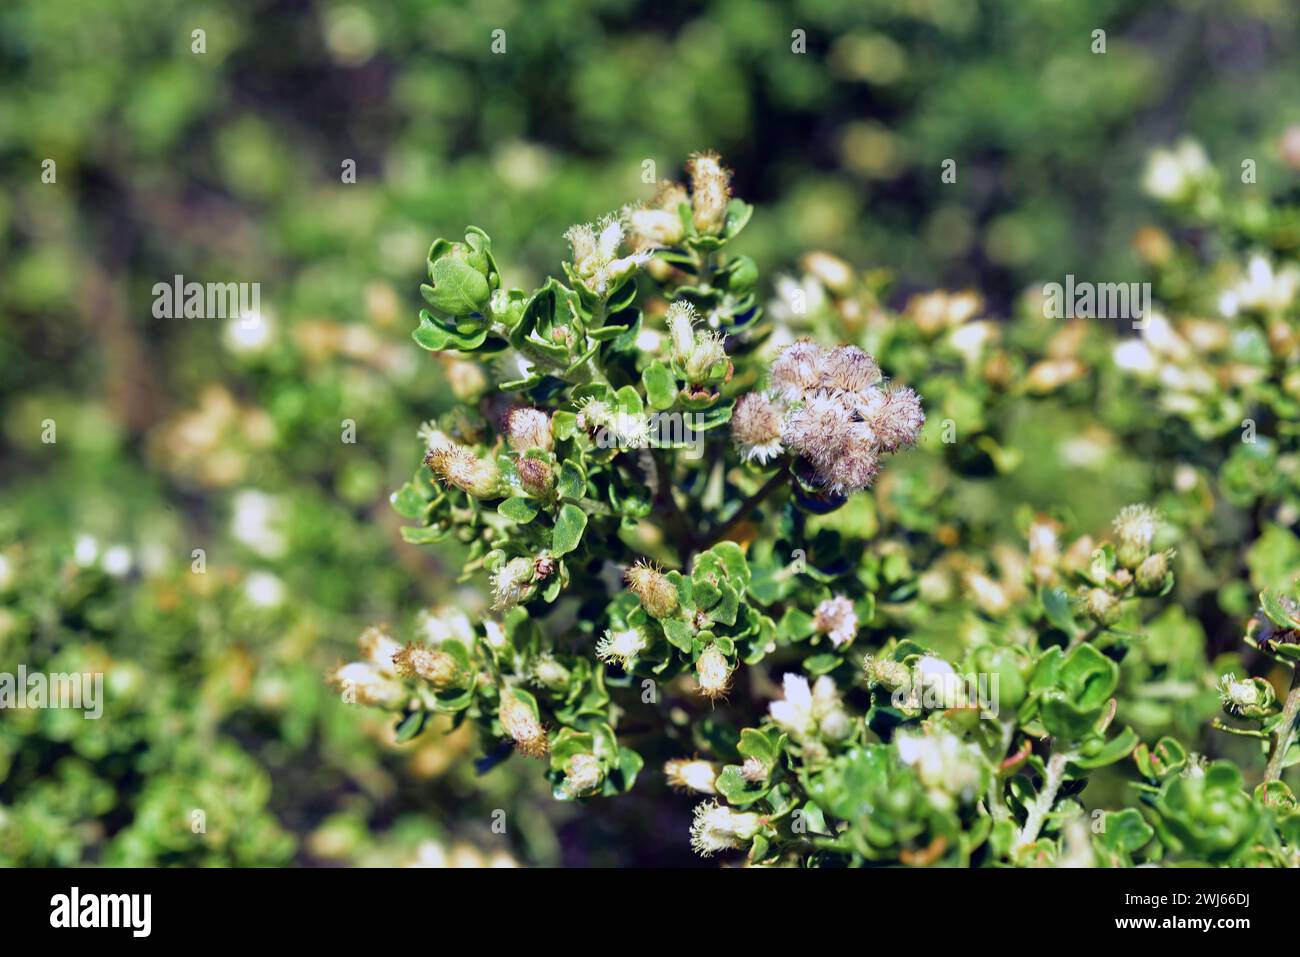 Vautro or gaultro (Baccharis concava) is a perennial shrub native to Chile. Fruits detail. Stock Photo